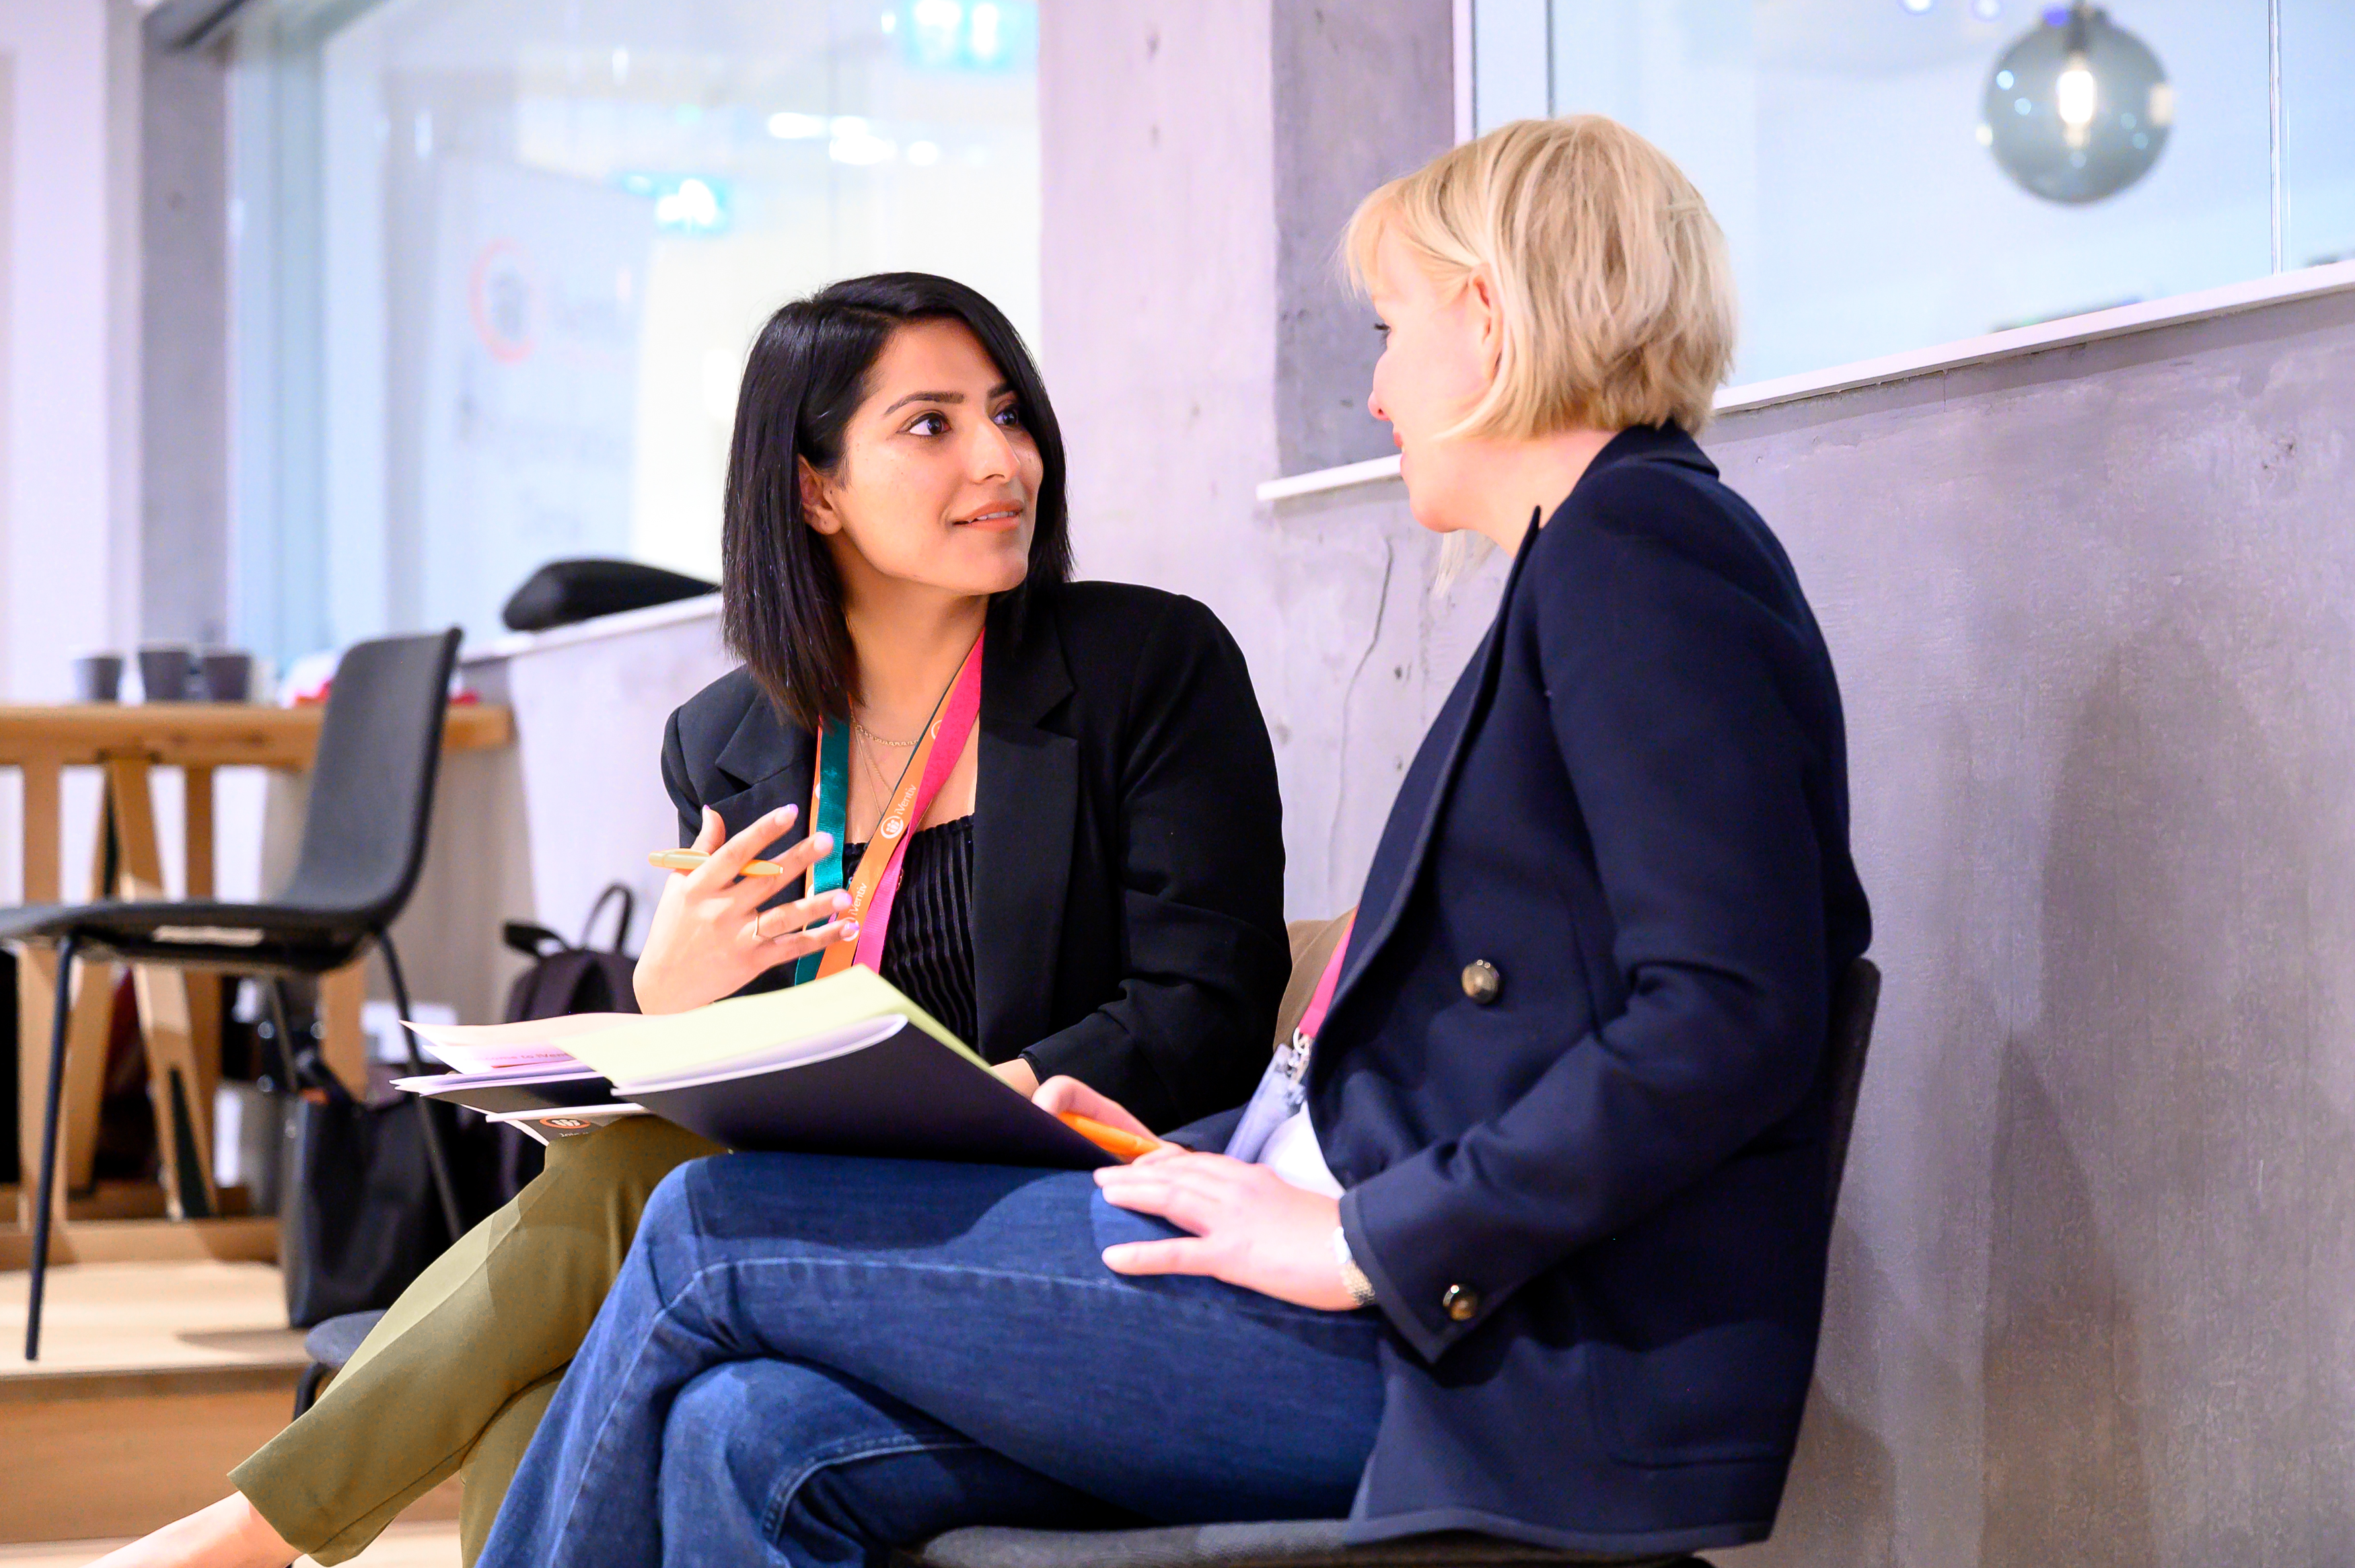 Two women in conversation at an iVentiv event